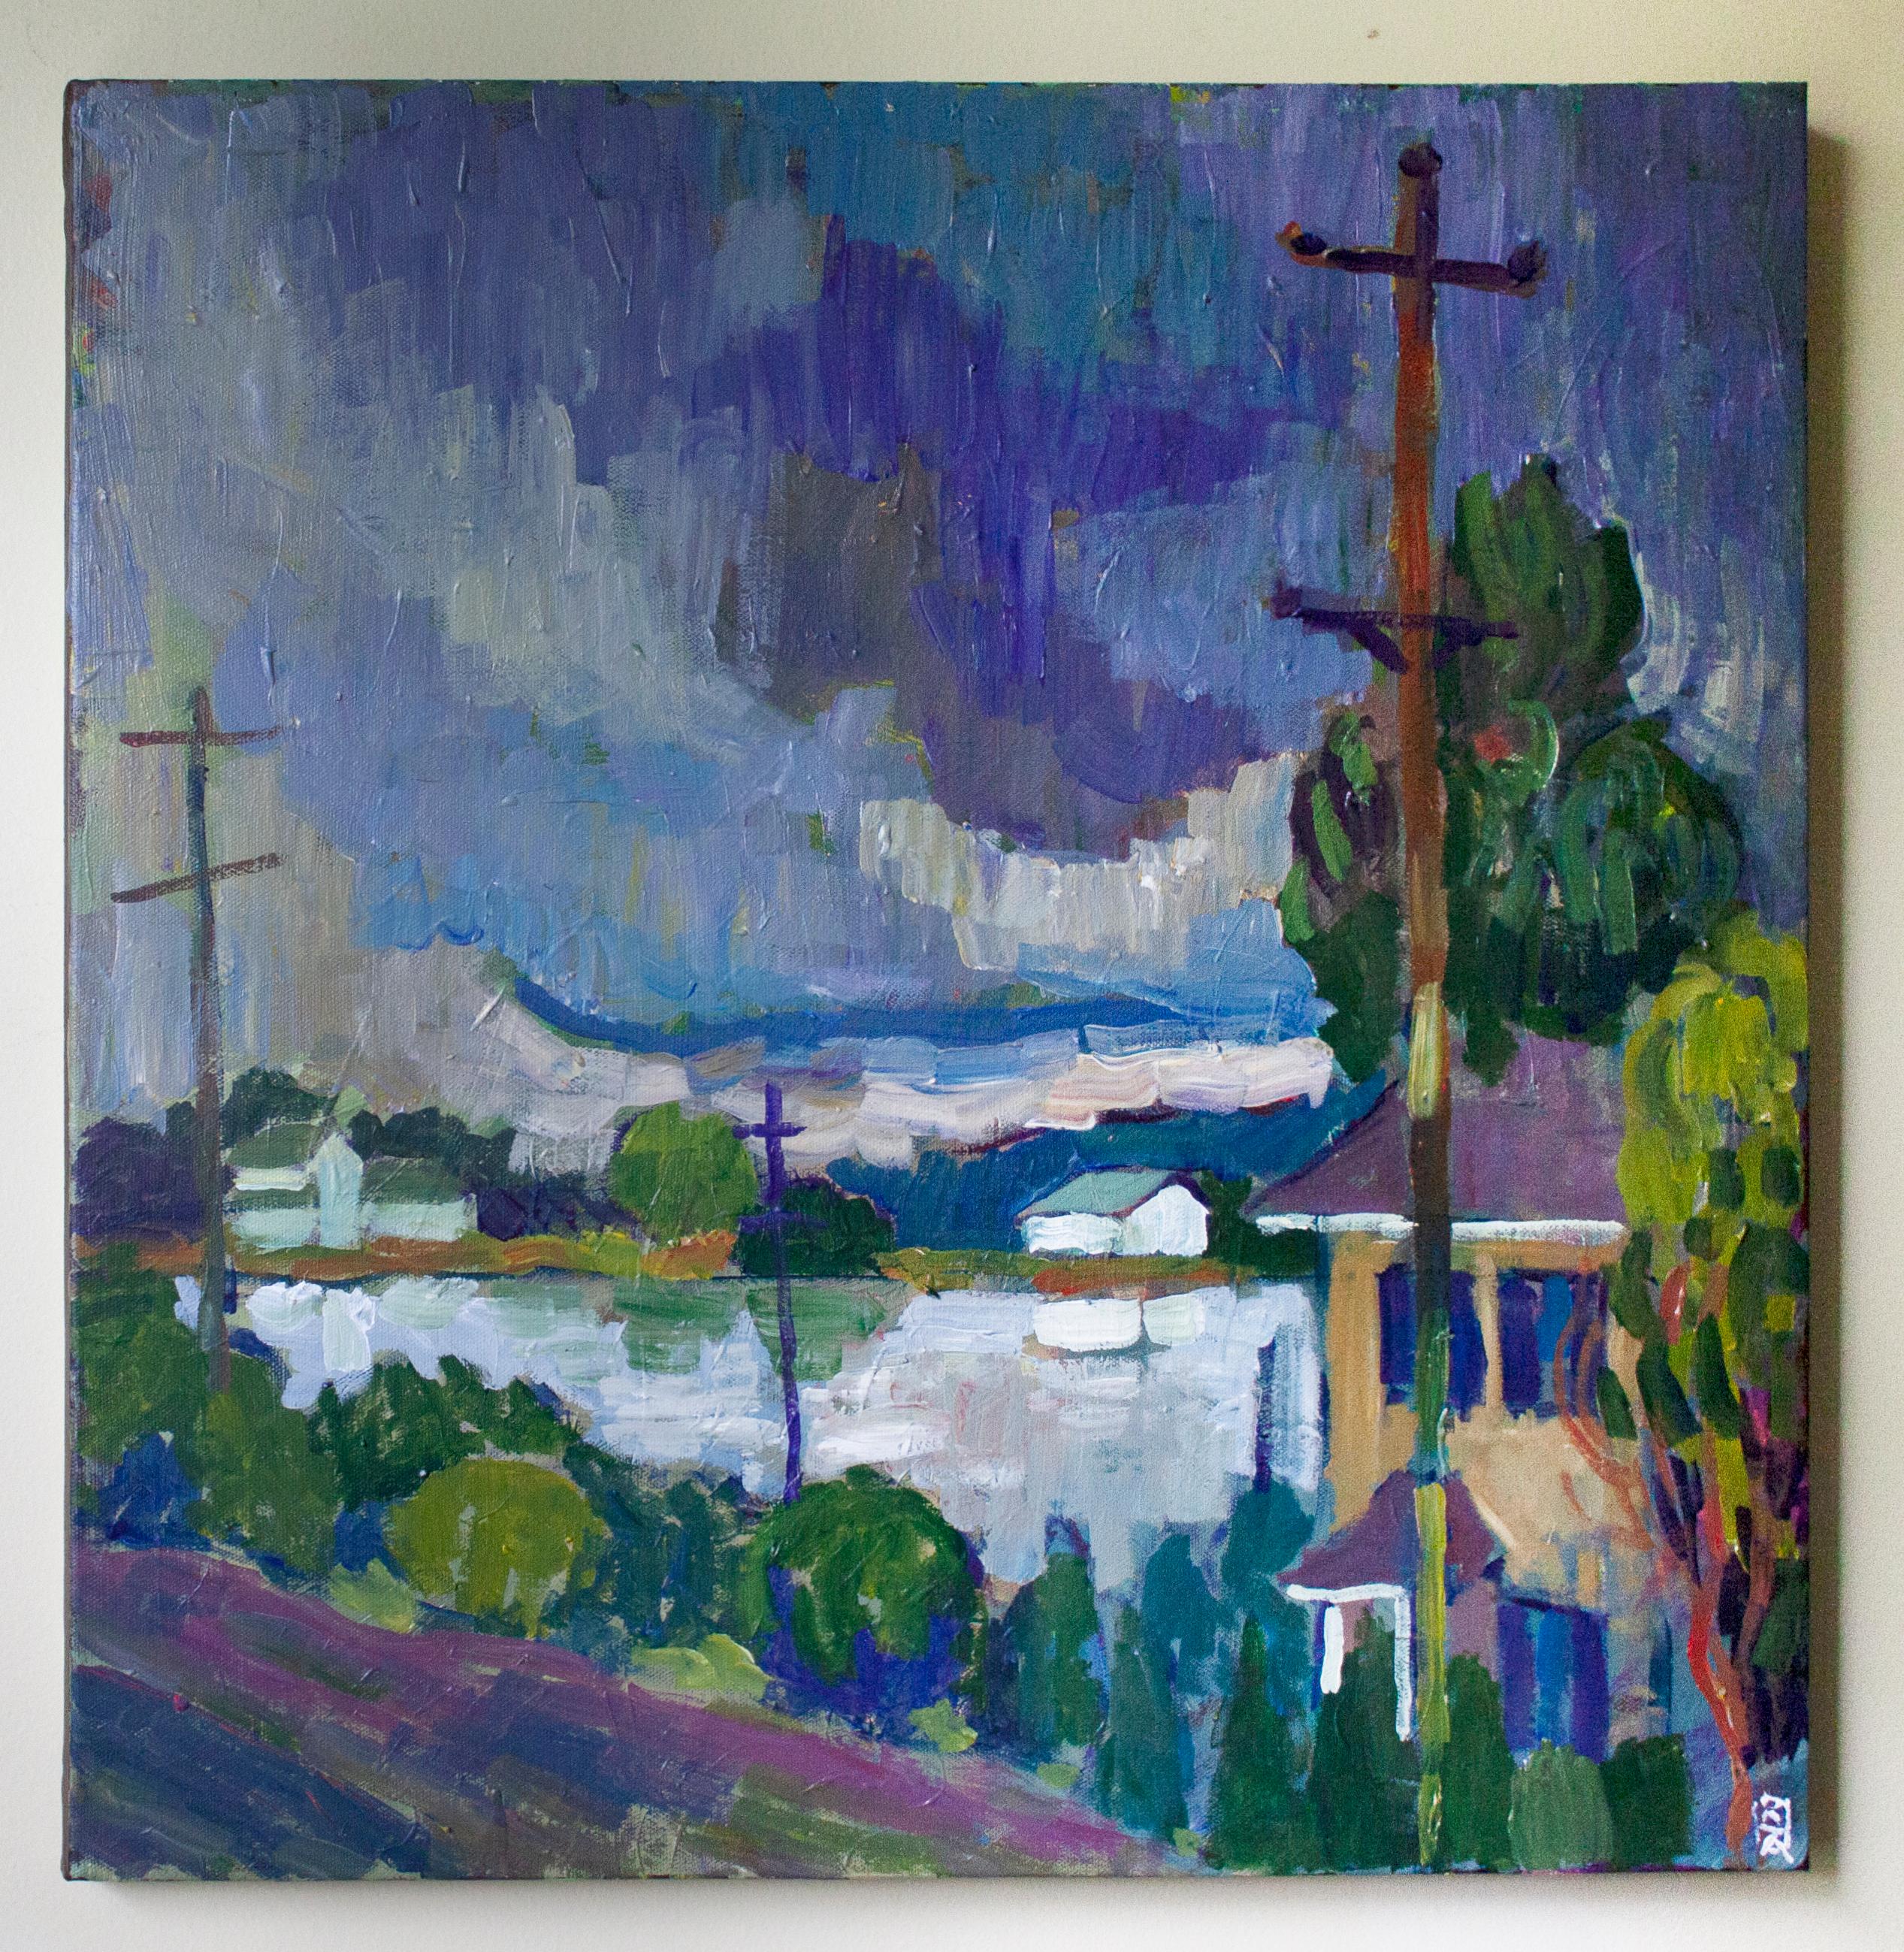 Storm over C&D Canal, Original Painting - Abstract Expressionist Art by Robert Hofherr